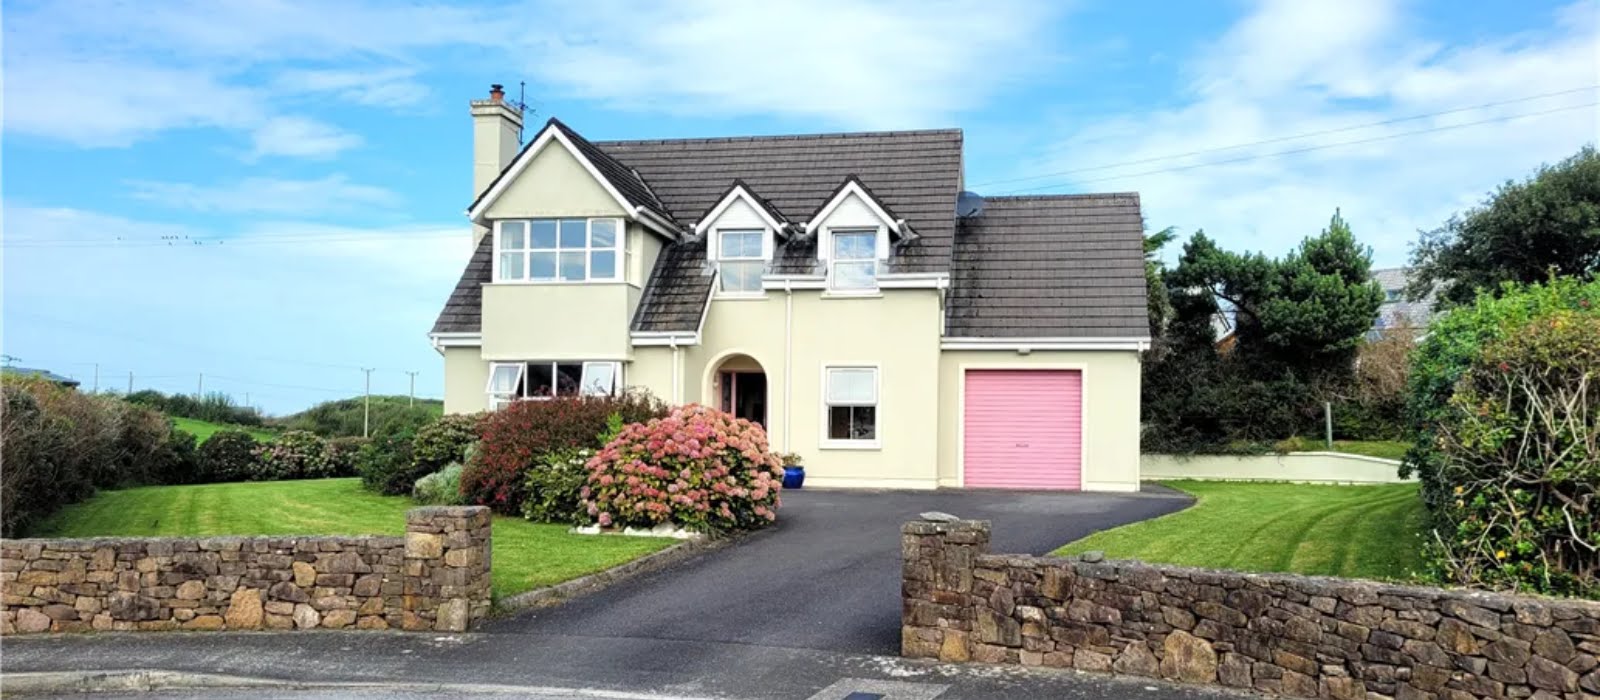 This modern family home in Co. Mayo is on the market for €420,000